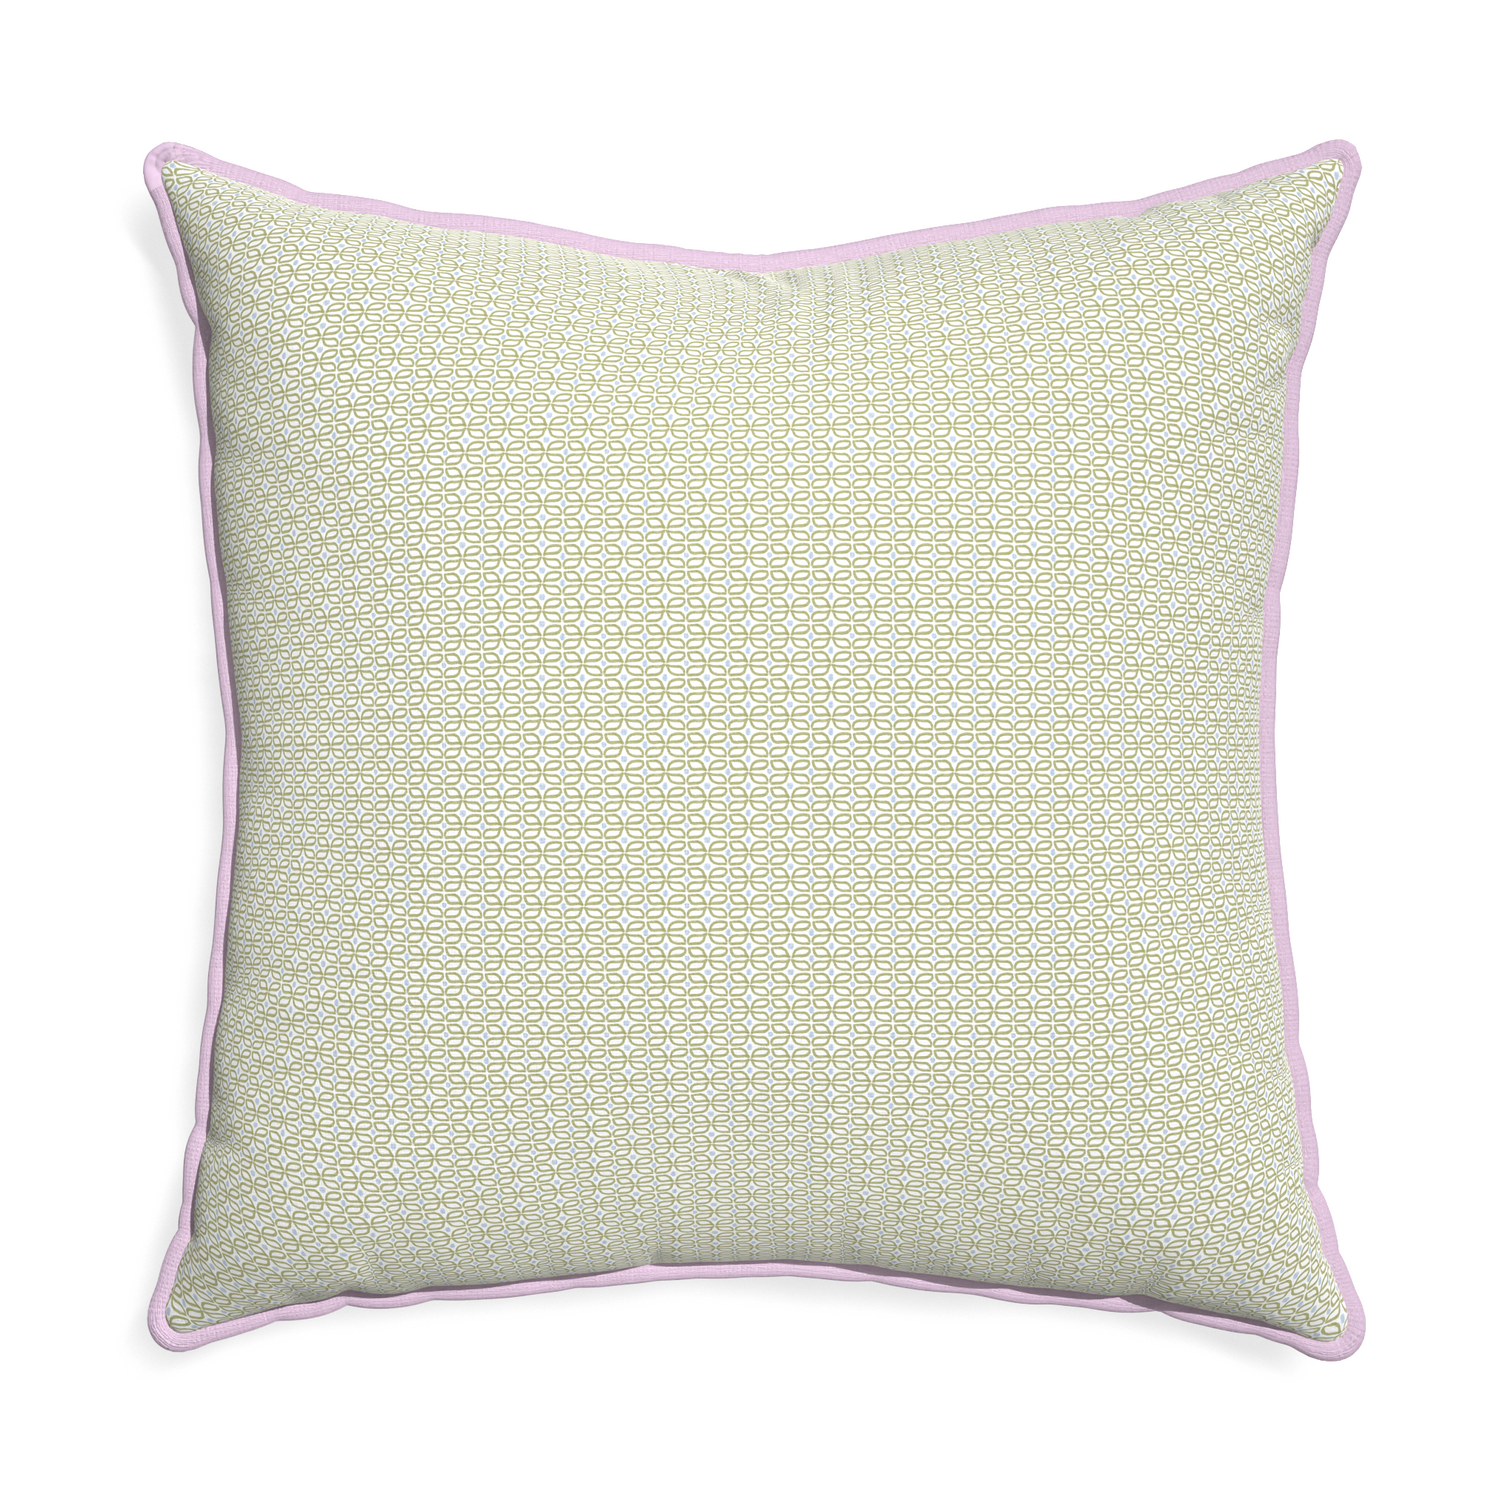 Euro-sham loomi moss custom pillow with l piping on white background